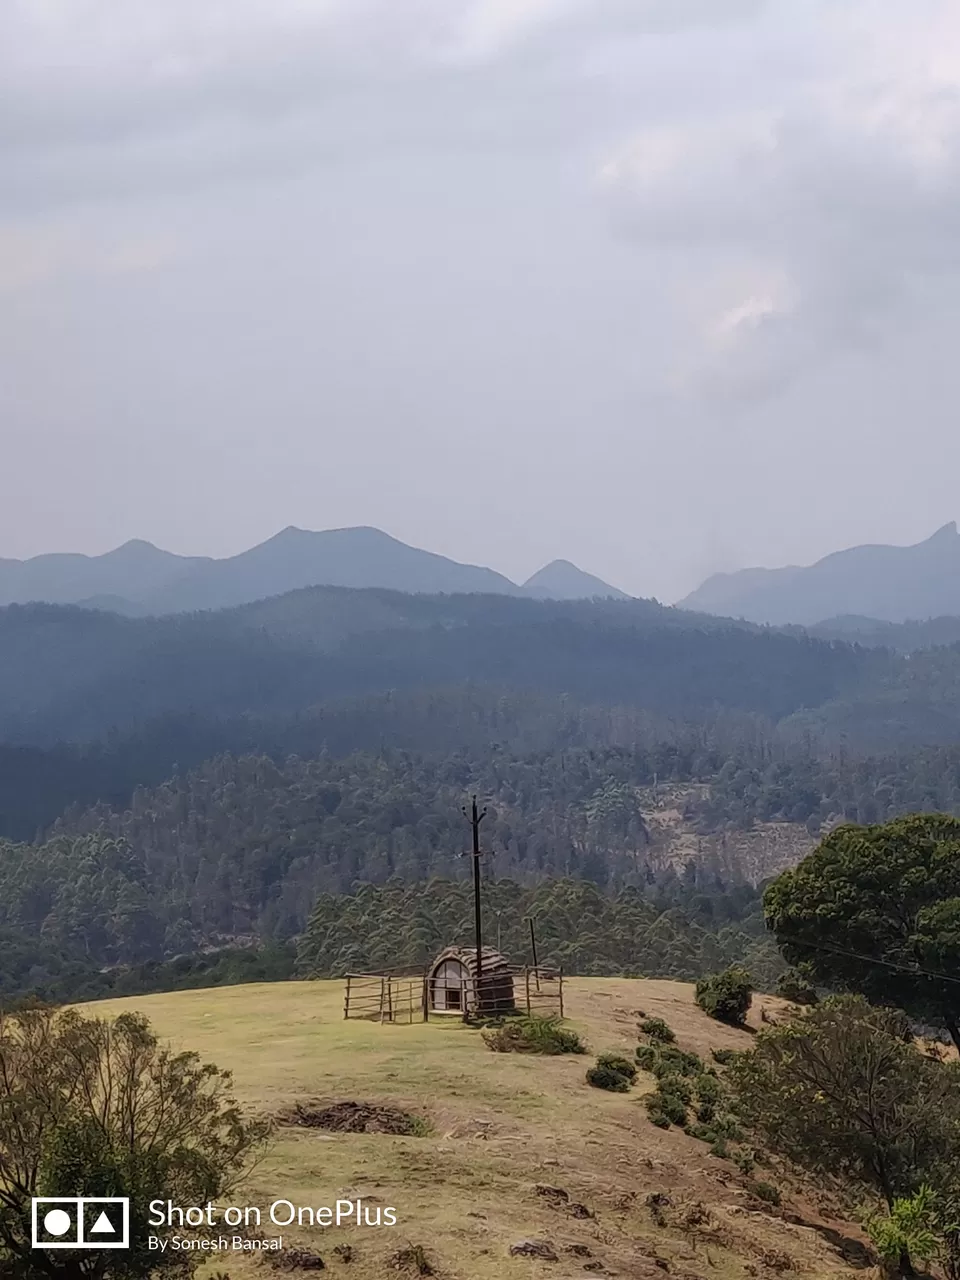 Photo of Wenlock Downs 9th Mile Shooting Point, Coimbatore-Ooty-Gundlupet Highway, Tamil Nadu, India by Sonesh Bansal